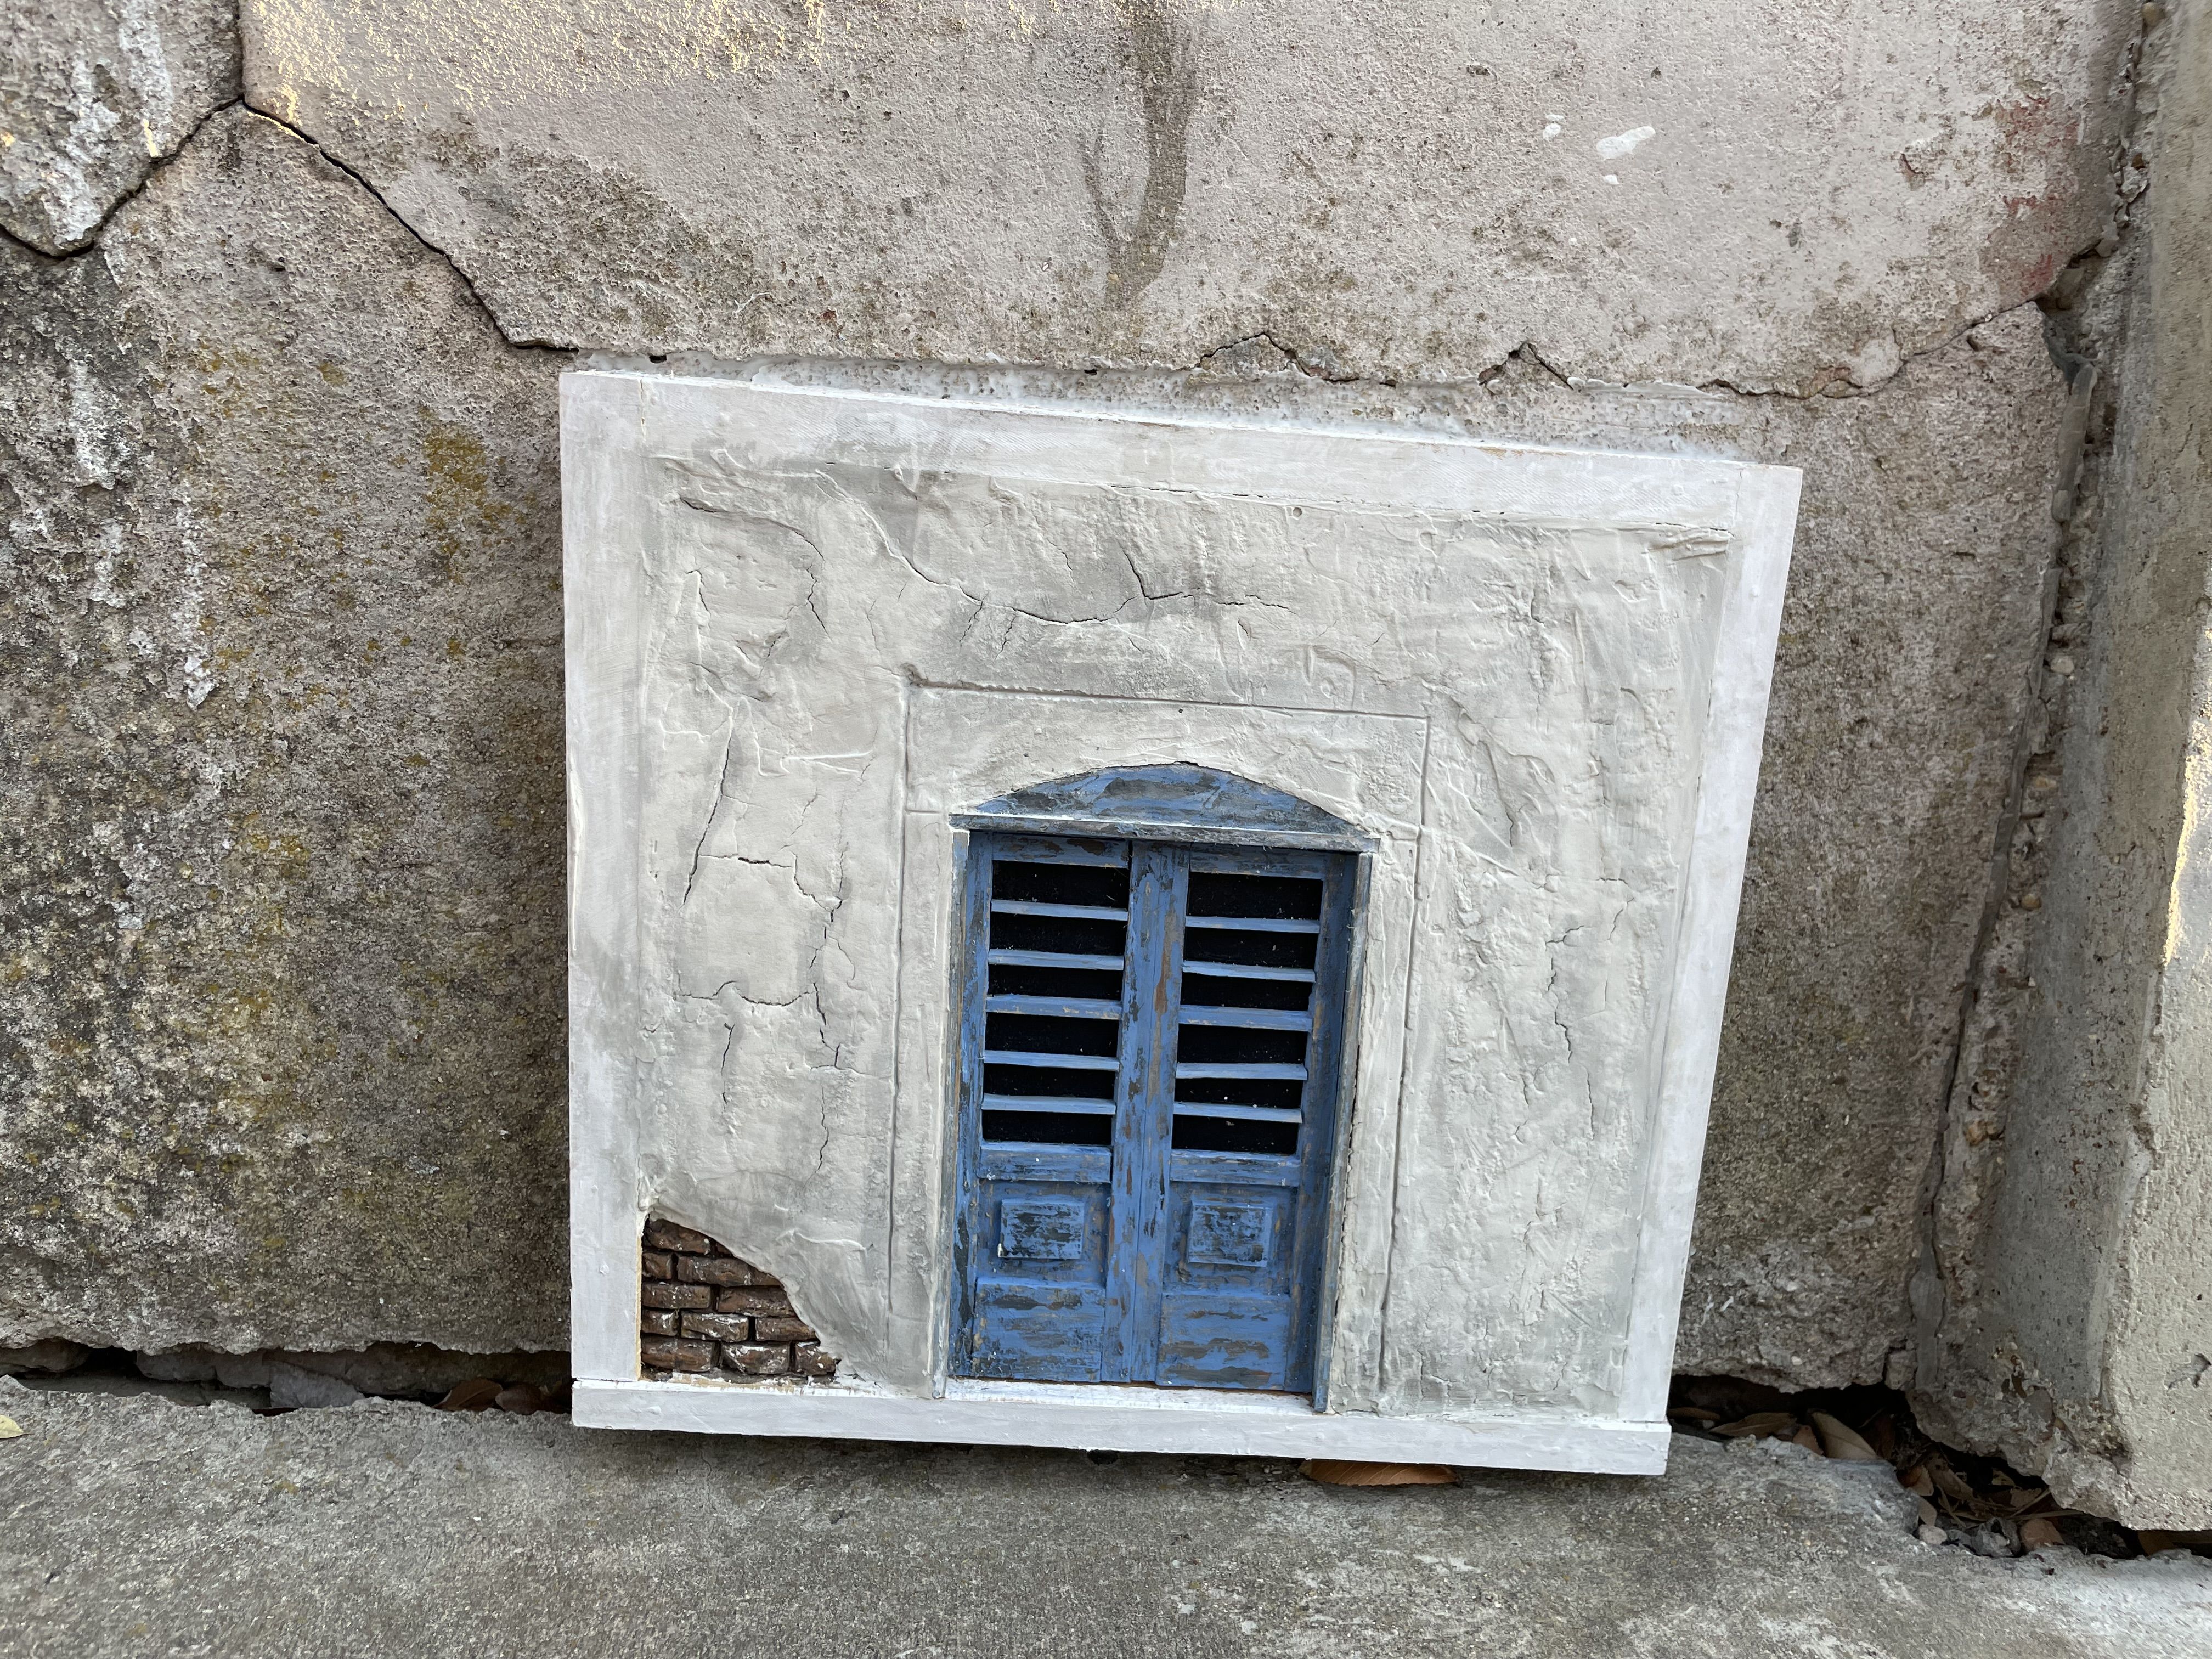 A tiny blue door at the bottom of stone wall